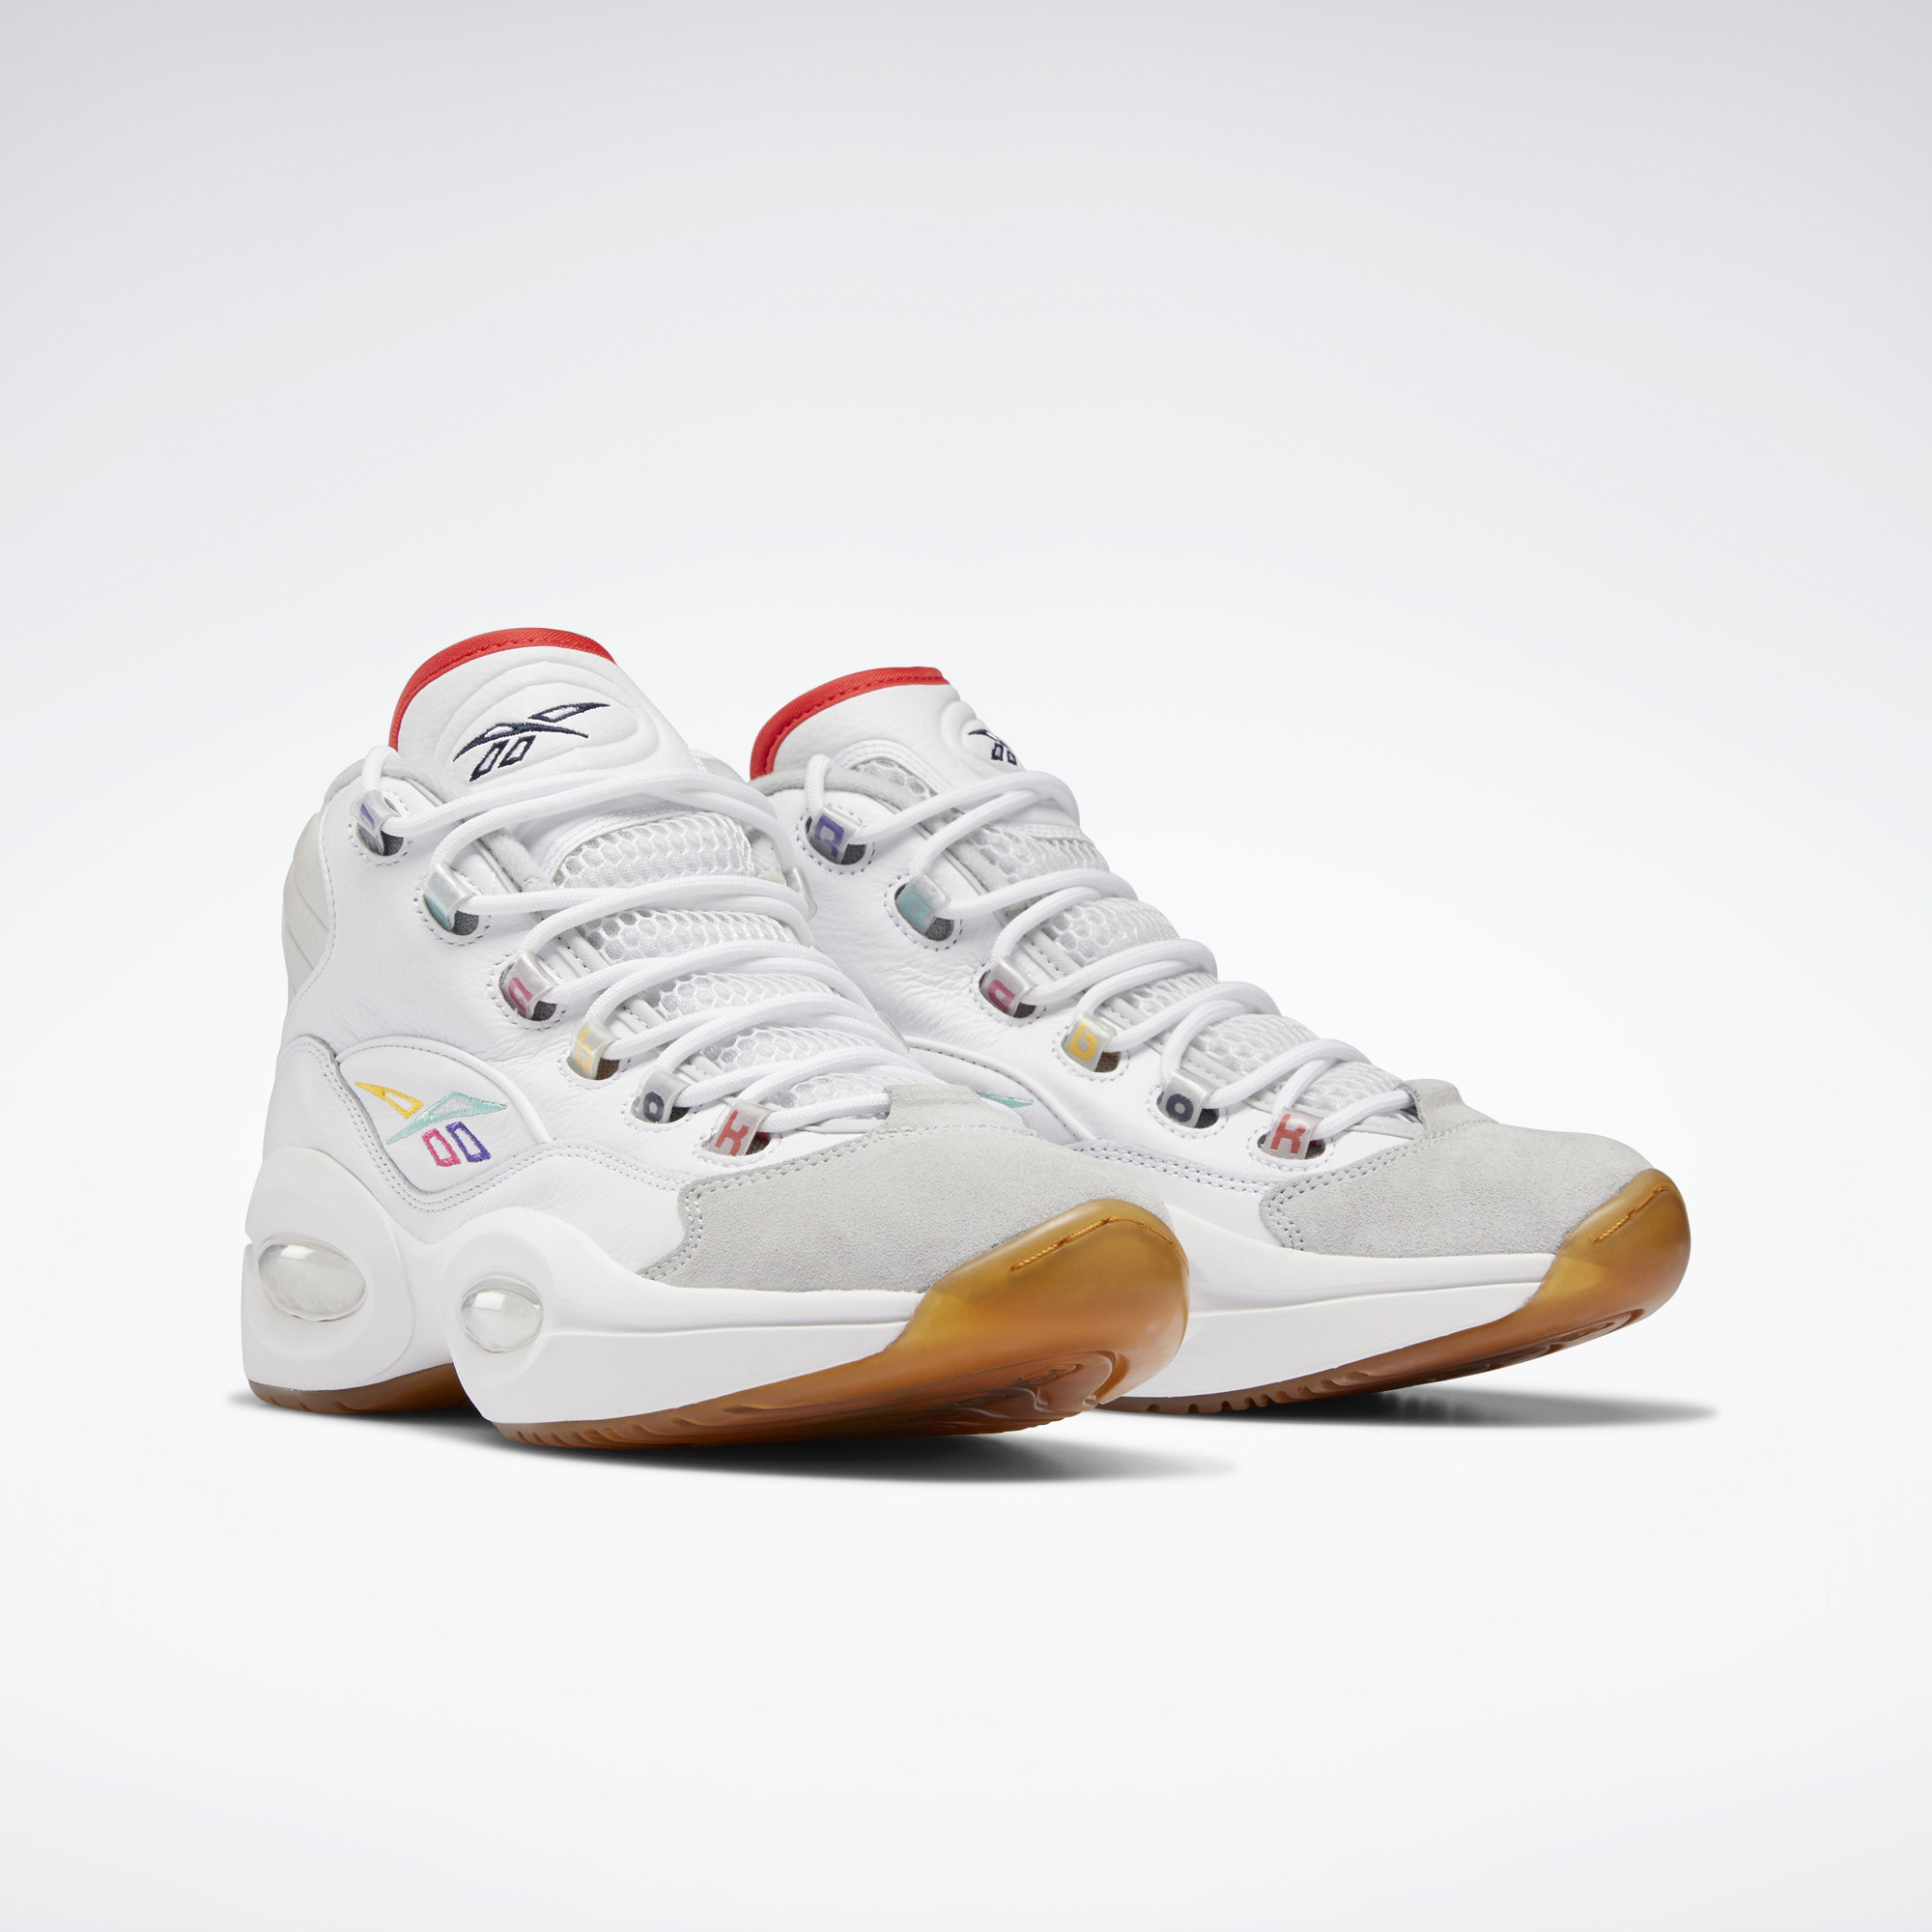 Chaussures de basketball pour homme Reebok Question mid - Cloud White / Vector Navy / Pure Grey 2